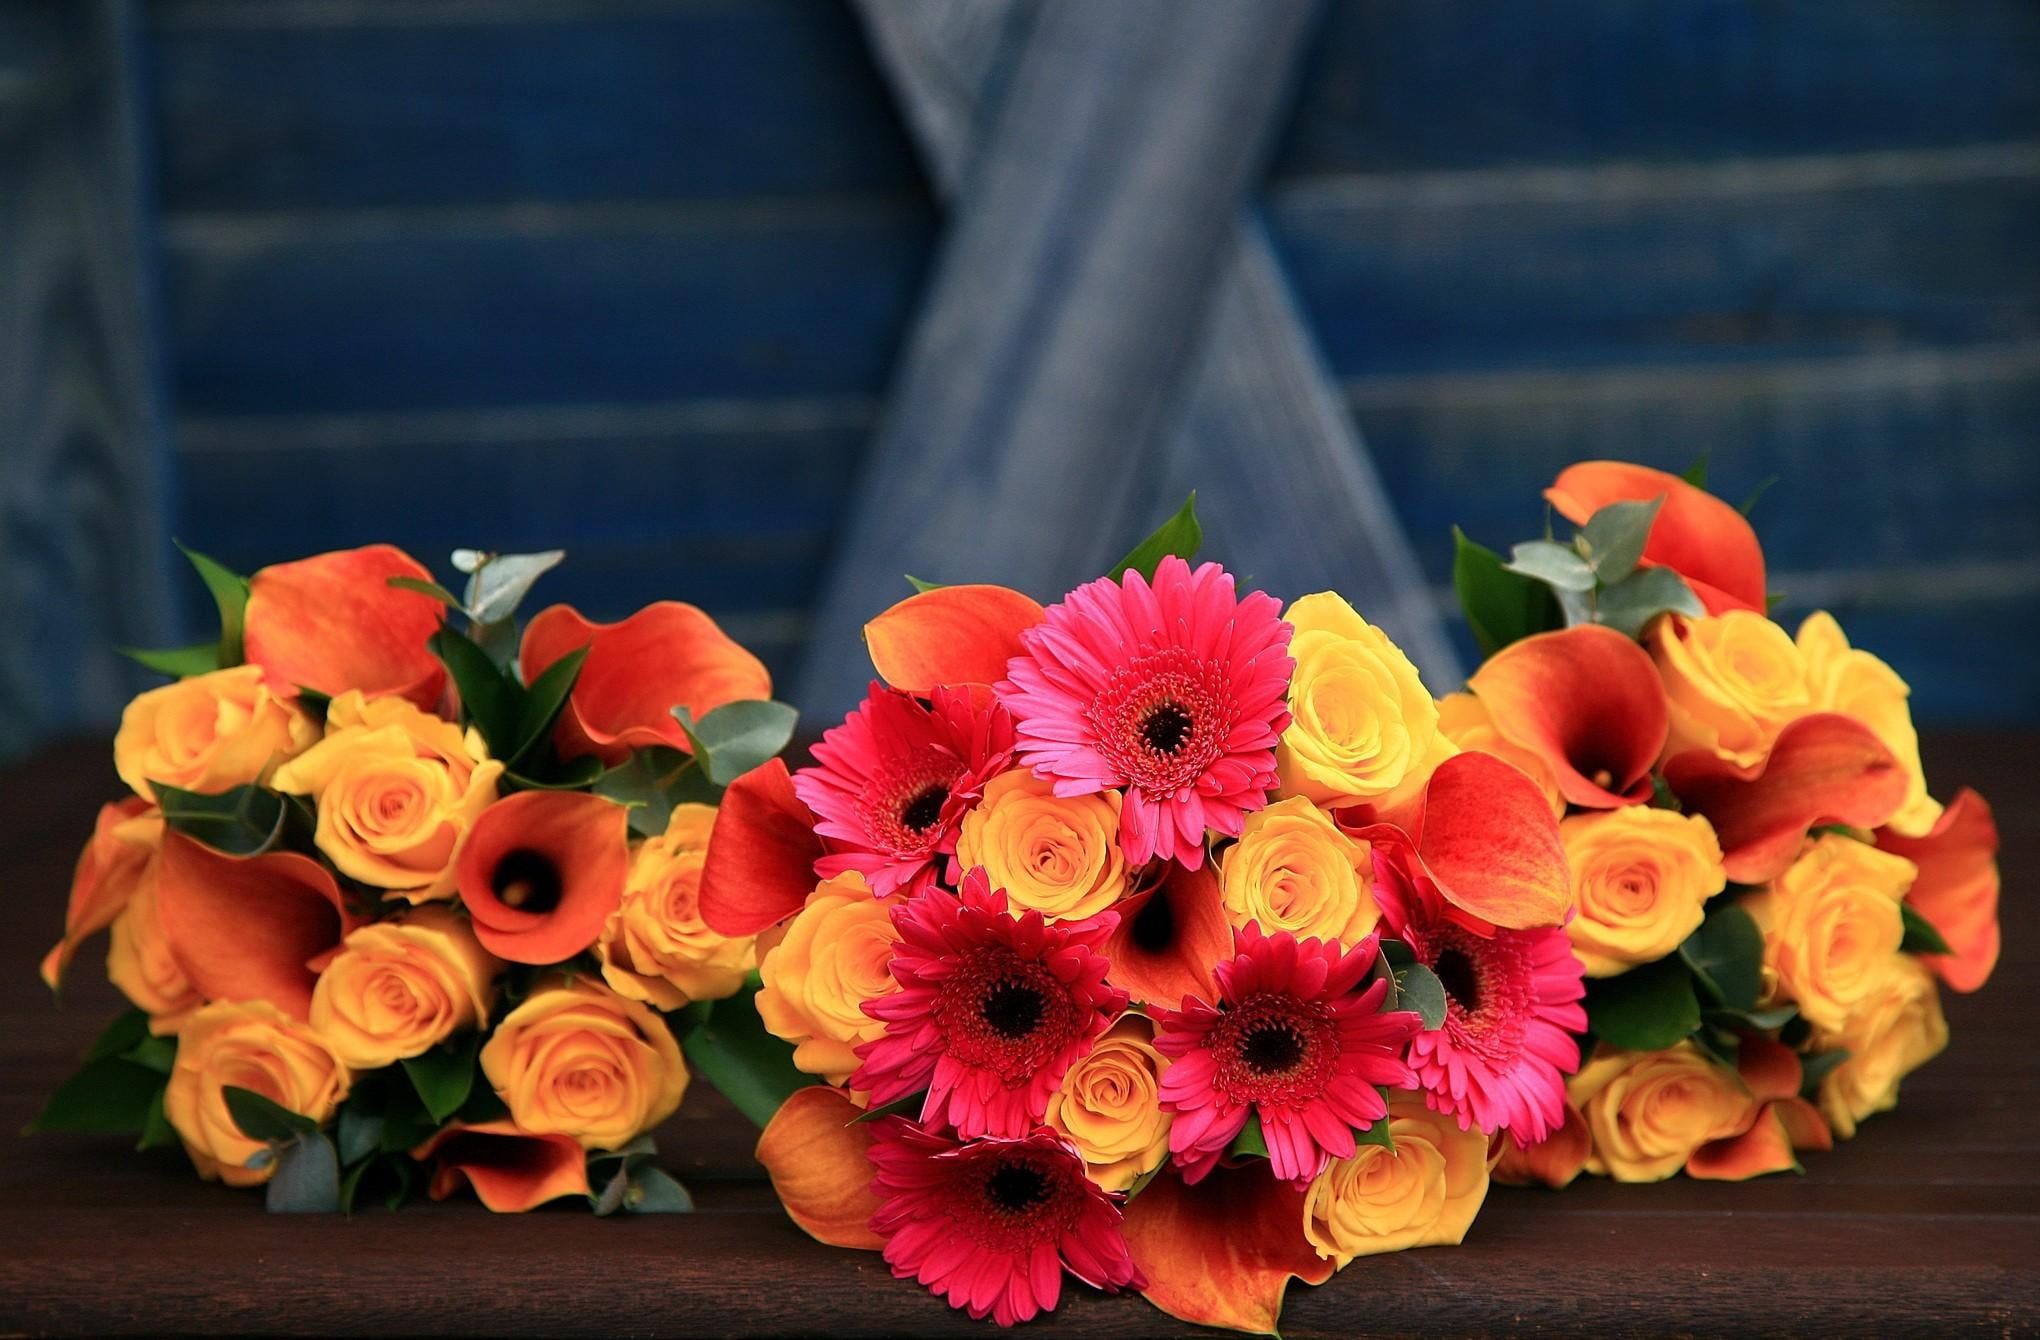 three yellow rose flowers, orange calla lilies, and pink Gerbera daisy flowers bouquets